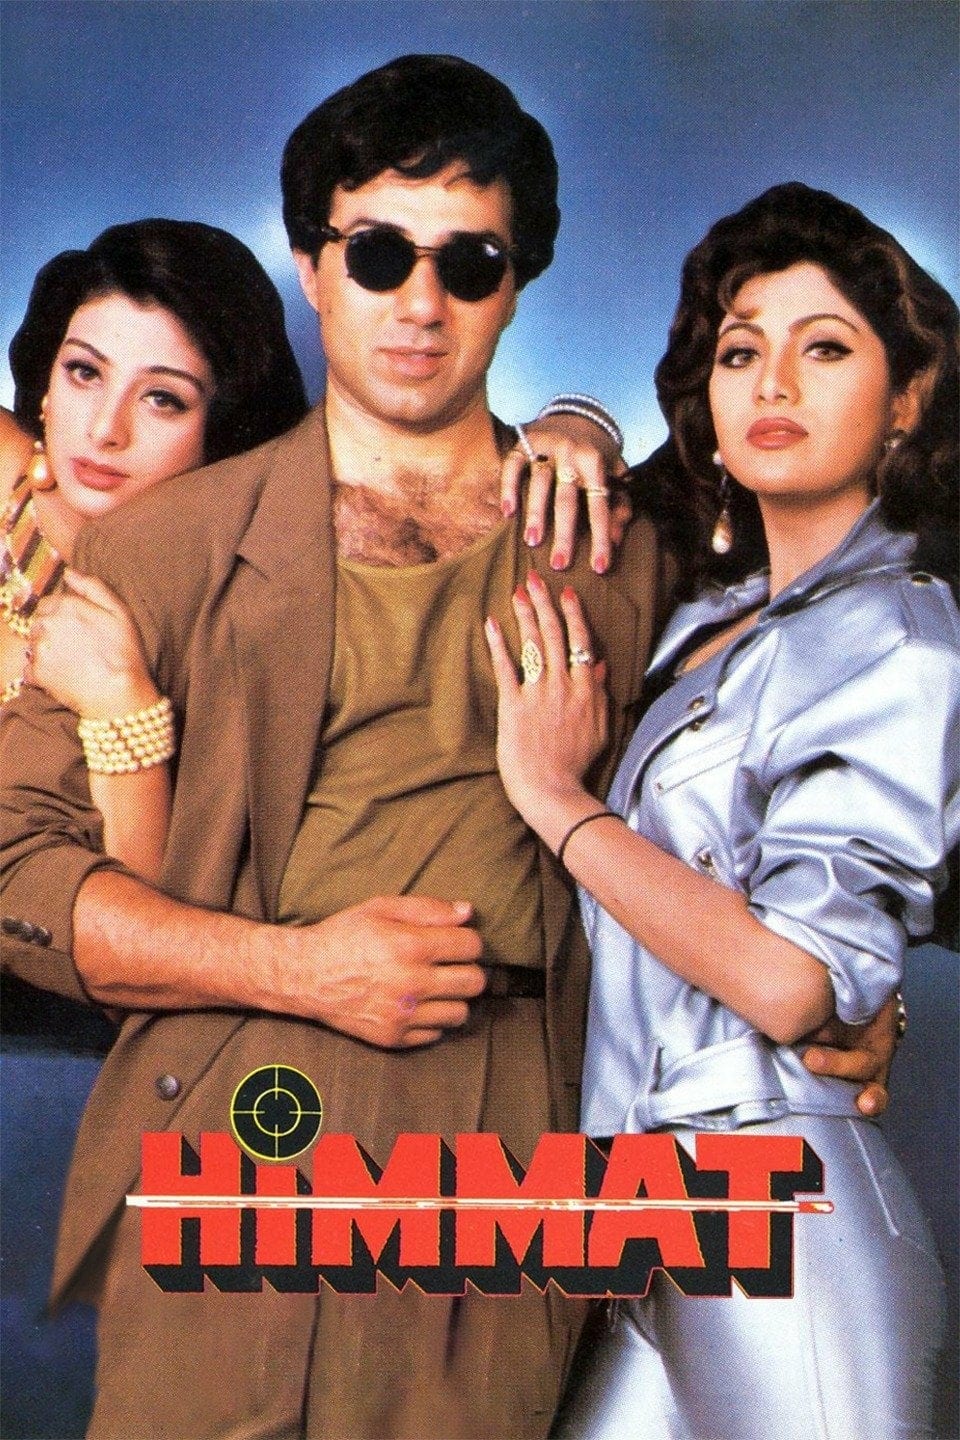 Poster for the movie "Himmat"